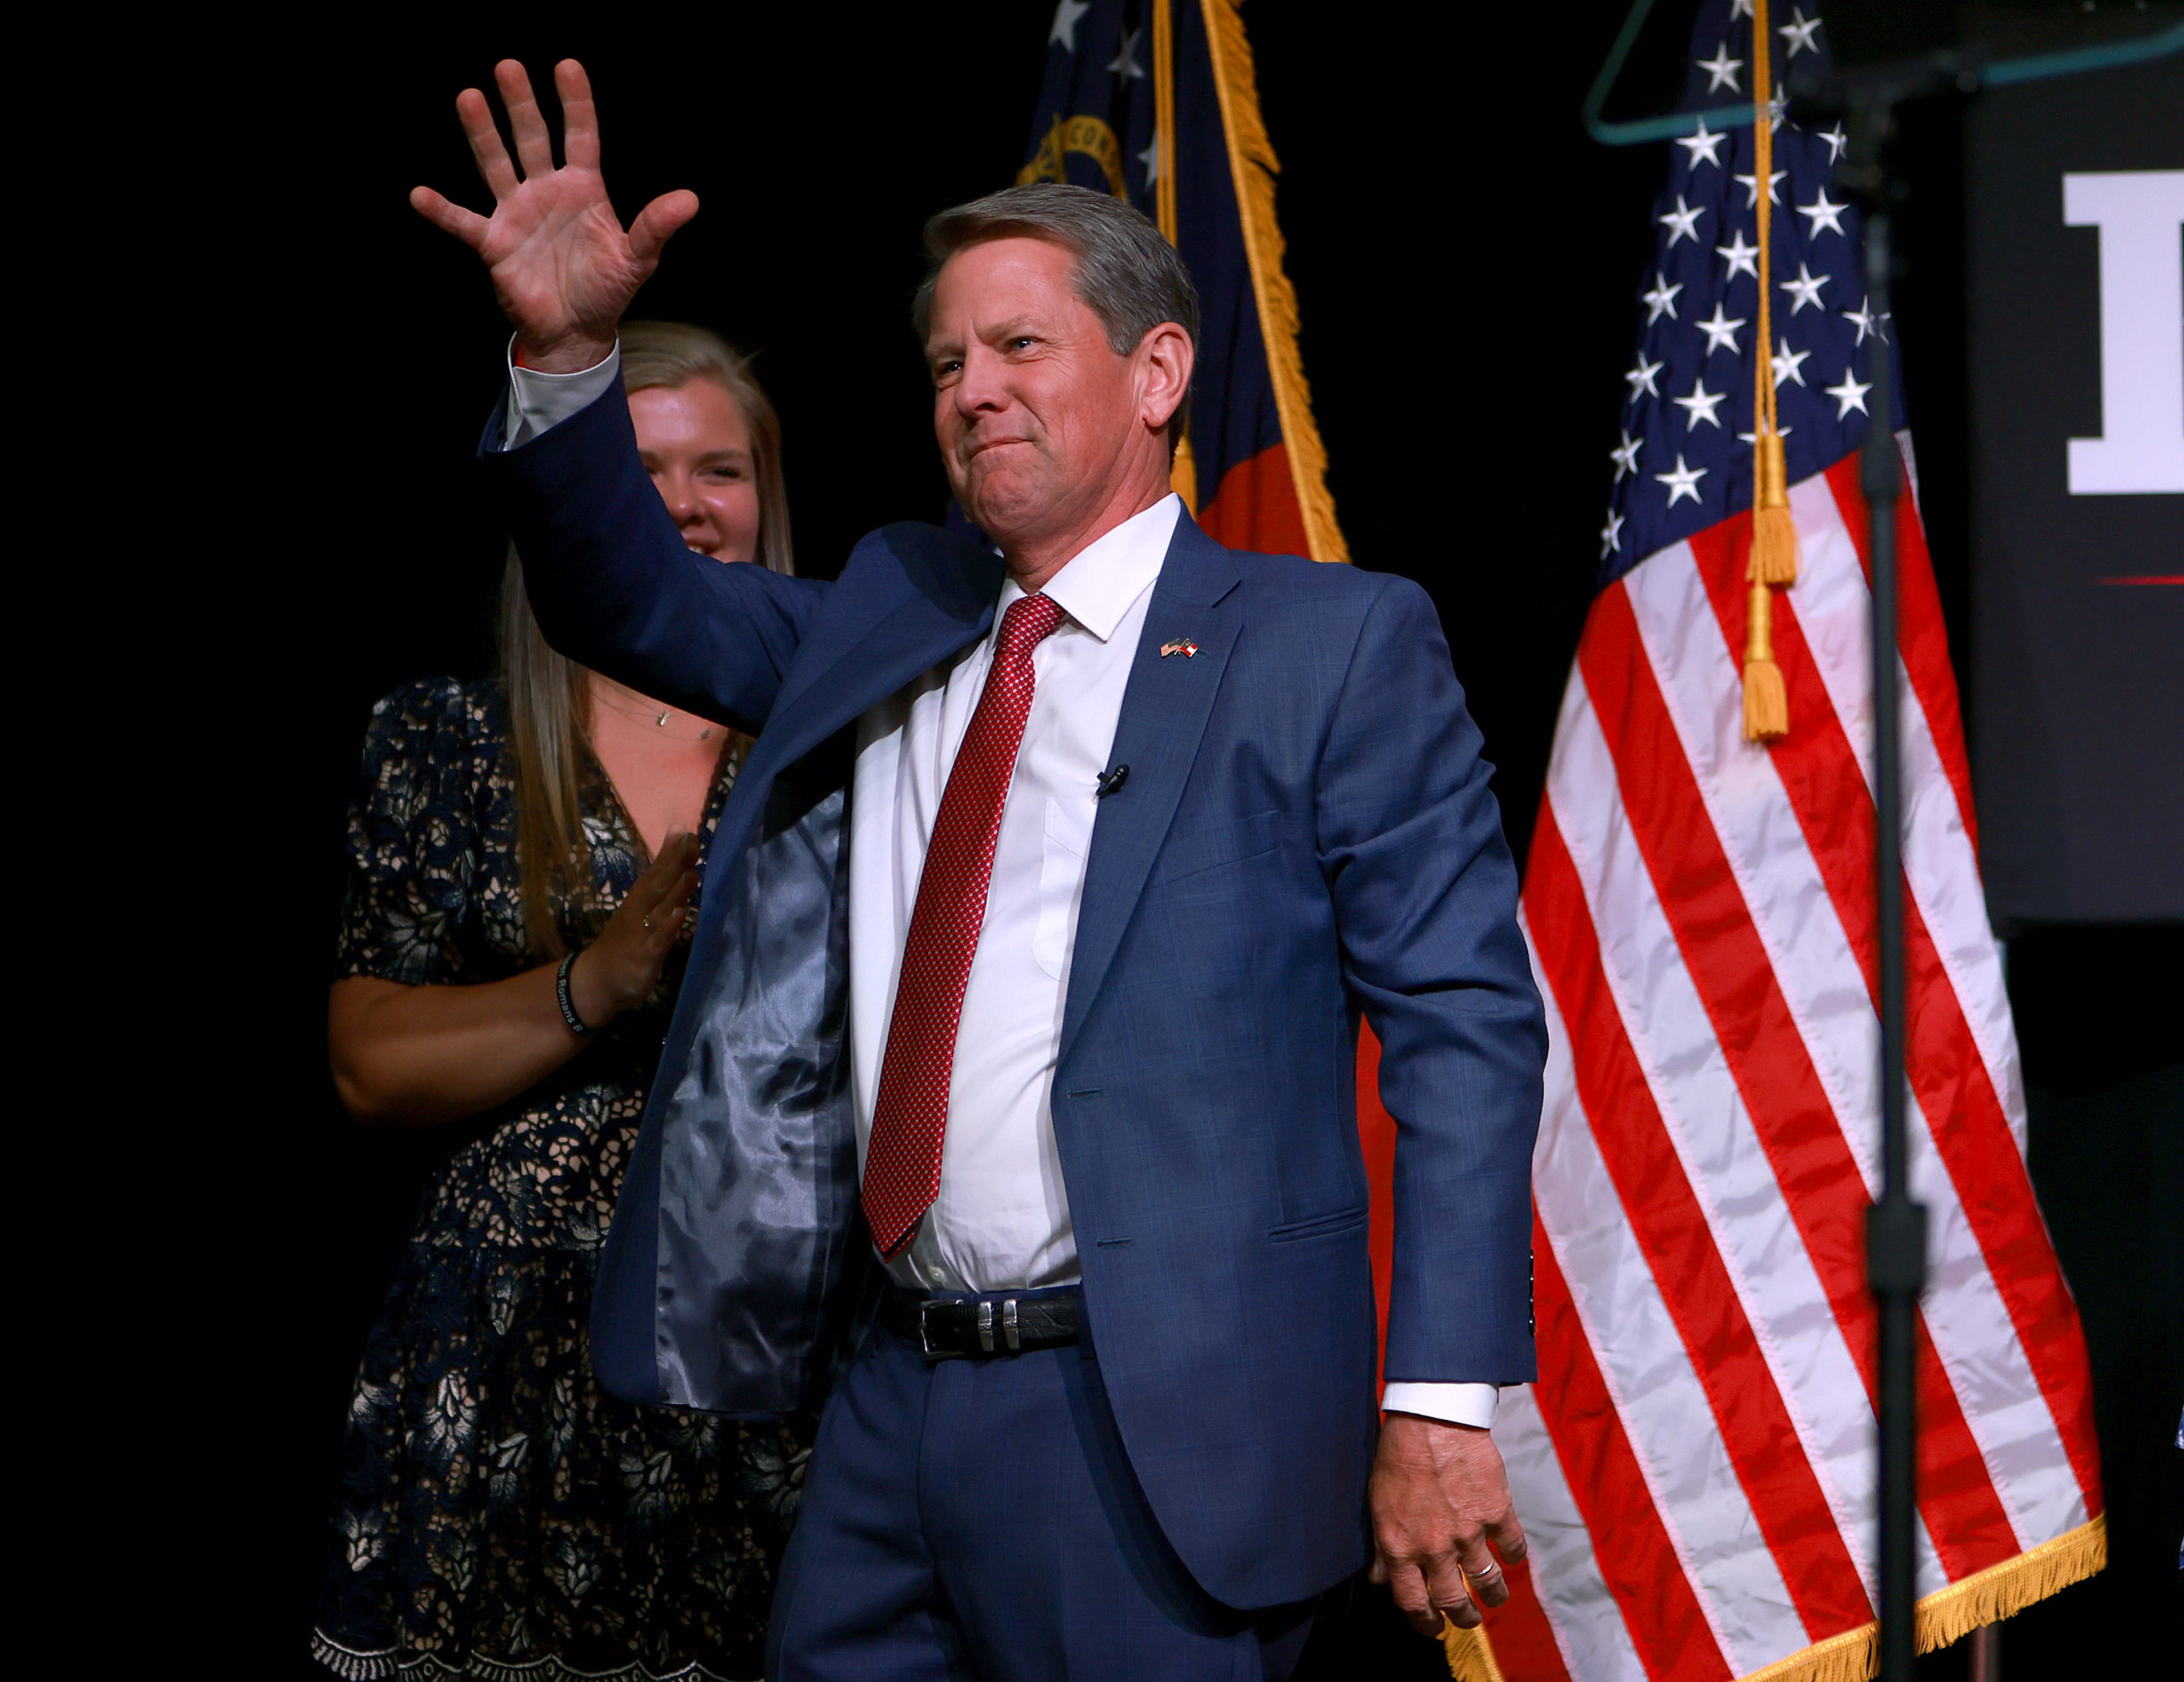 Republican gubernatorial candidate Gov. Brian Kemp waves during his primary night election party at the Chick-fil-A College Football Hall of Fame on May 24, 2022 in Atlanta, Georgia. (Photo by Joe Raedle/Getty Images)